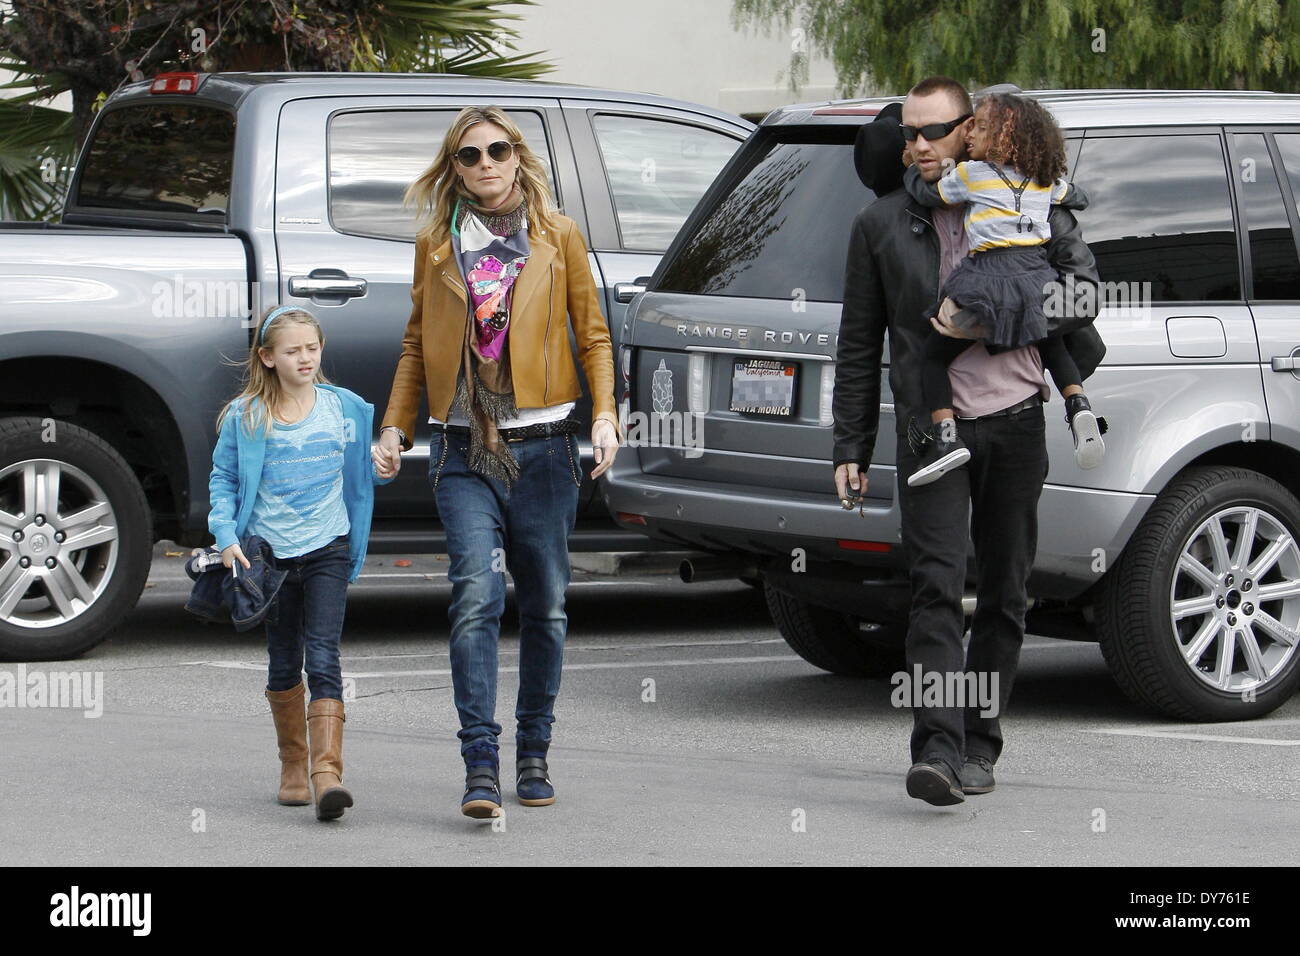 Heidi Klum shopping for groceries at Whole Foods with her boyfriend and two daughters Featuring: Heidi Klum,Martin Kirsten,Helene Boshoven Samuel,Leni Samuel Where: Los Angeles California USA When: 30 Dec 2012 Stock Photo